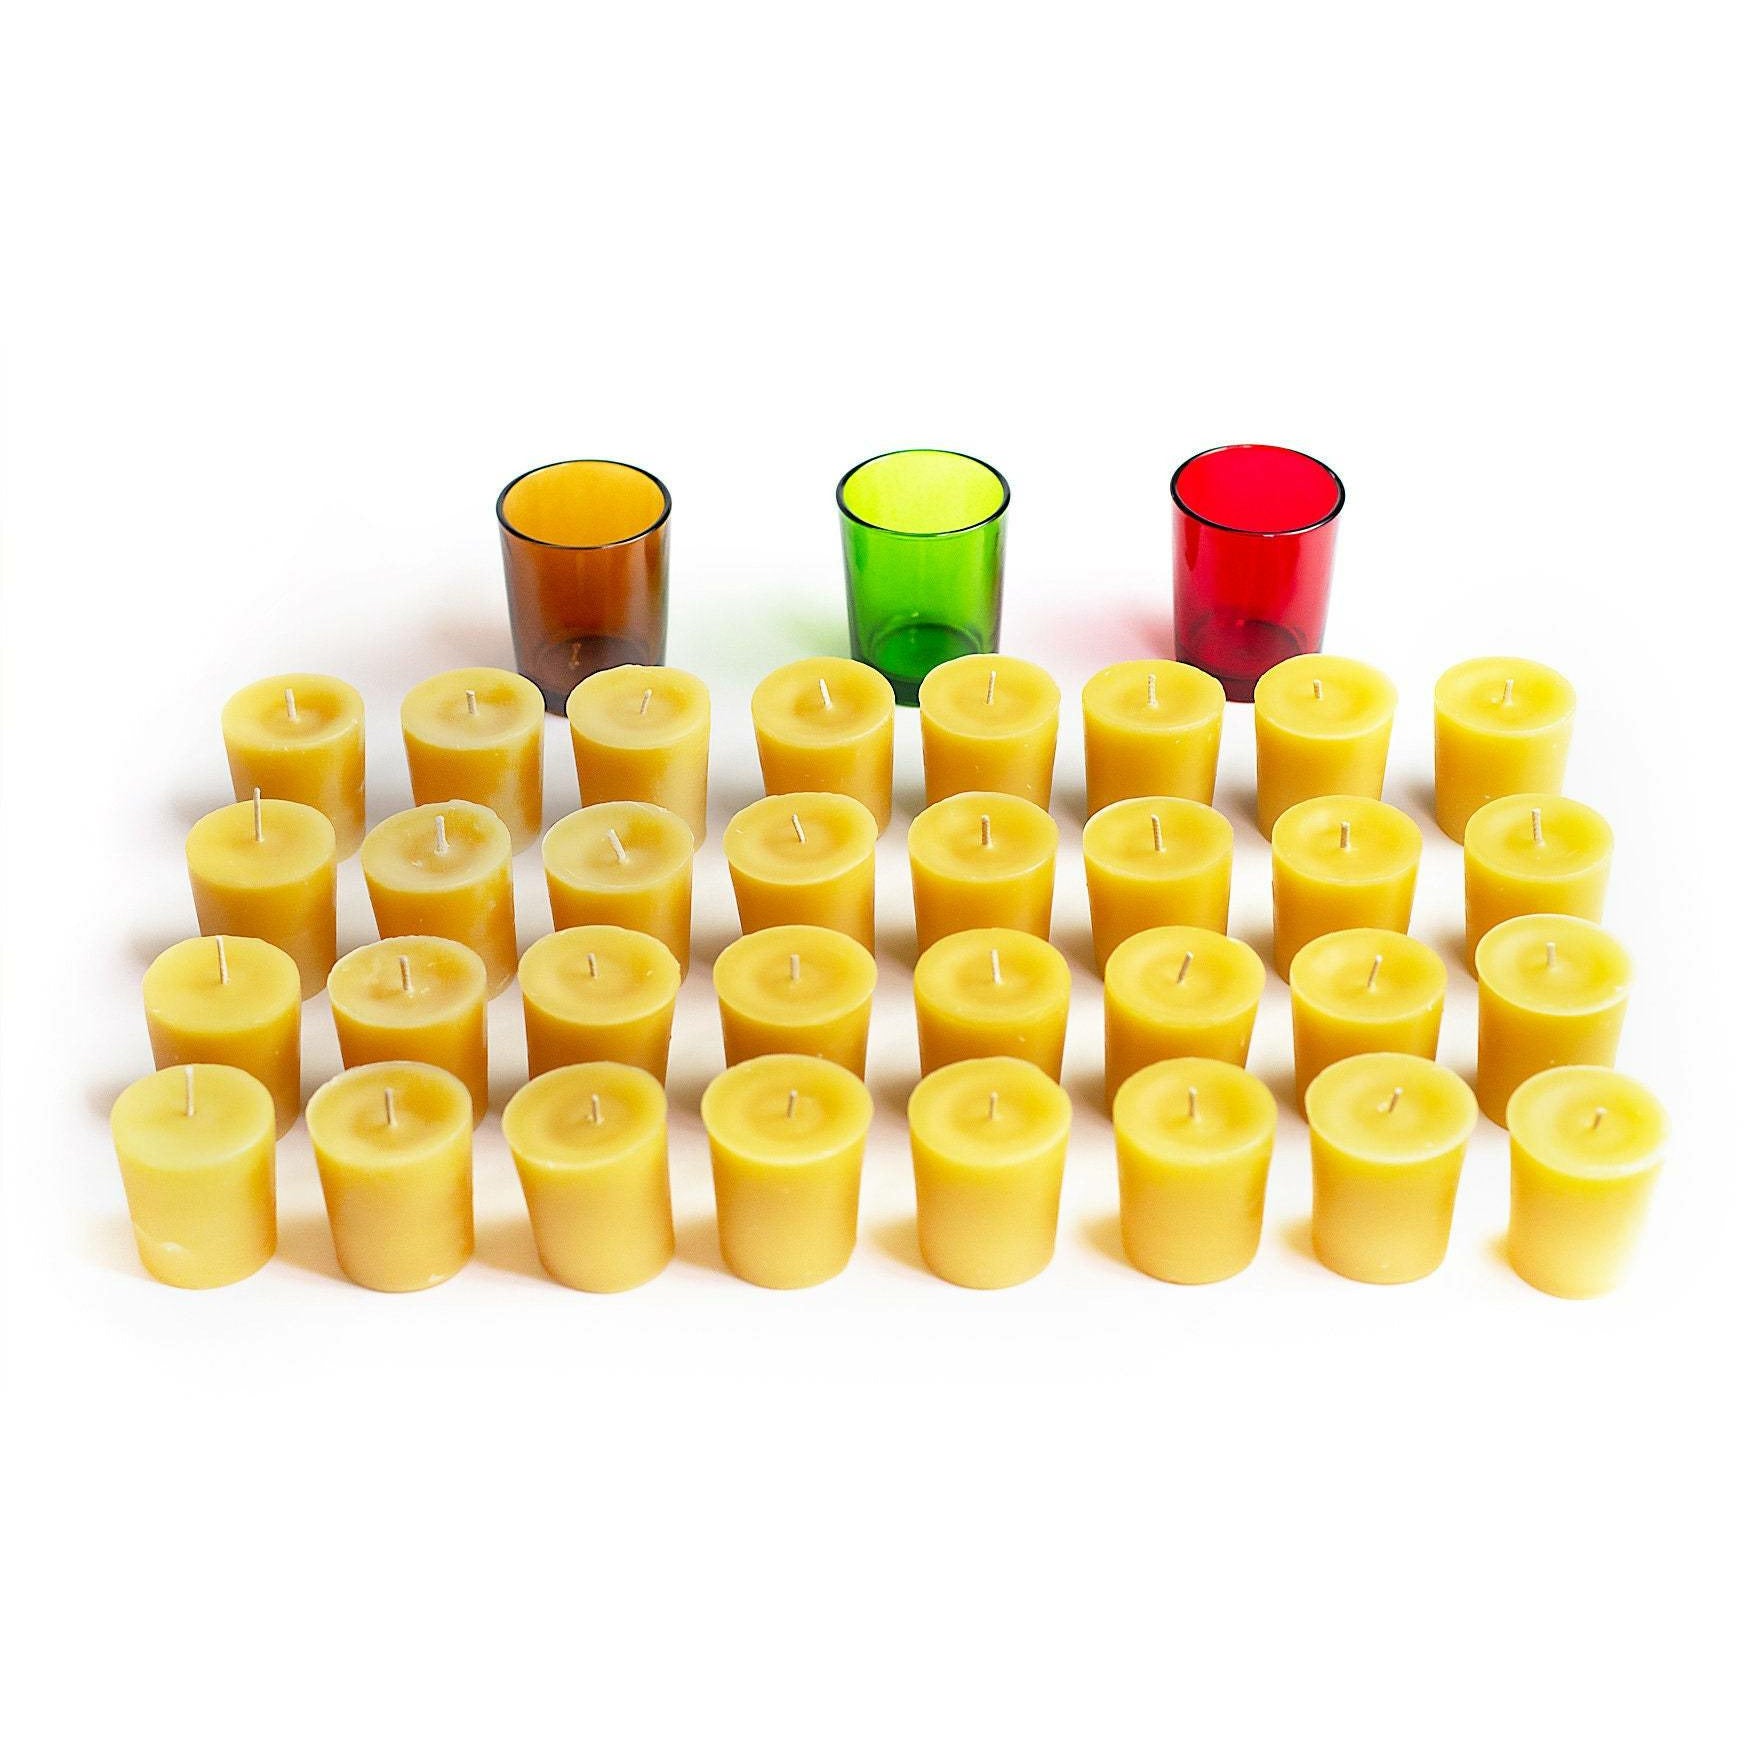  Mtlee 32 Pcs Natural Beeswax Votive Candles with